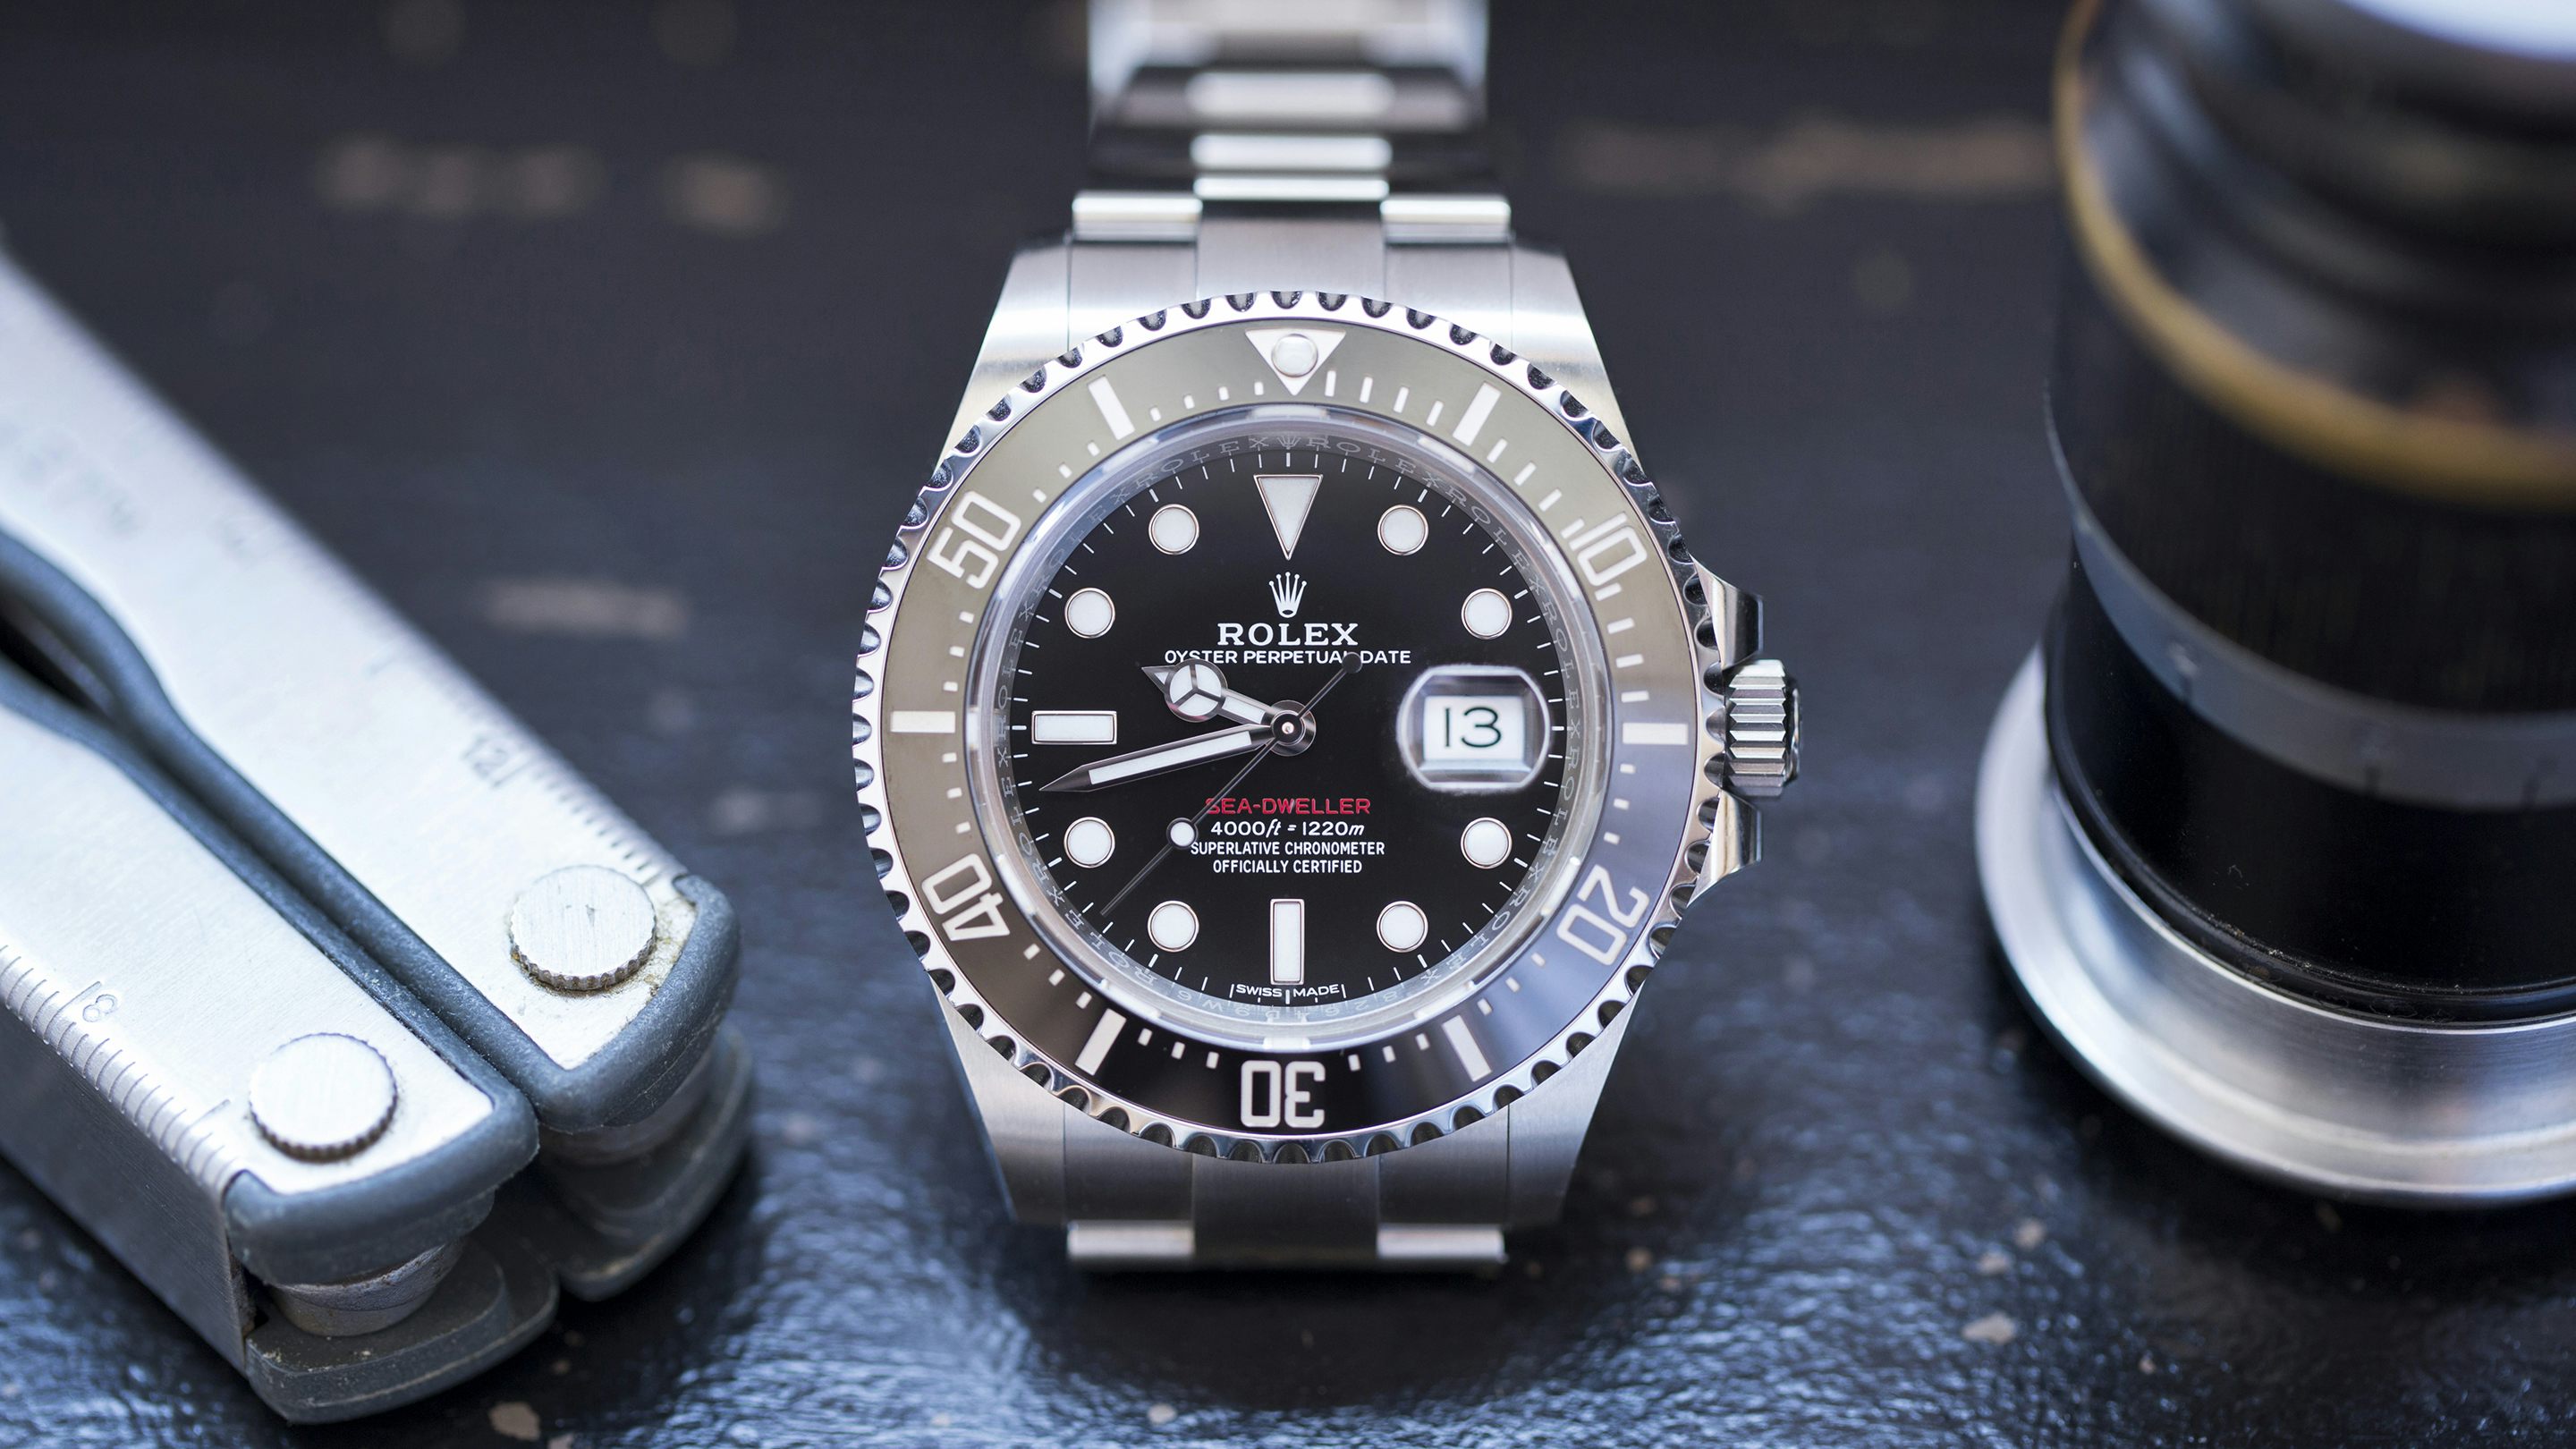 Mudret ramme Milliard A Week On The Wrist: The Rolex Sea-Dweller Reference 126600 - Hodinkee